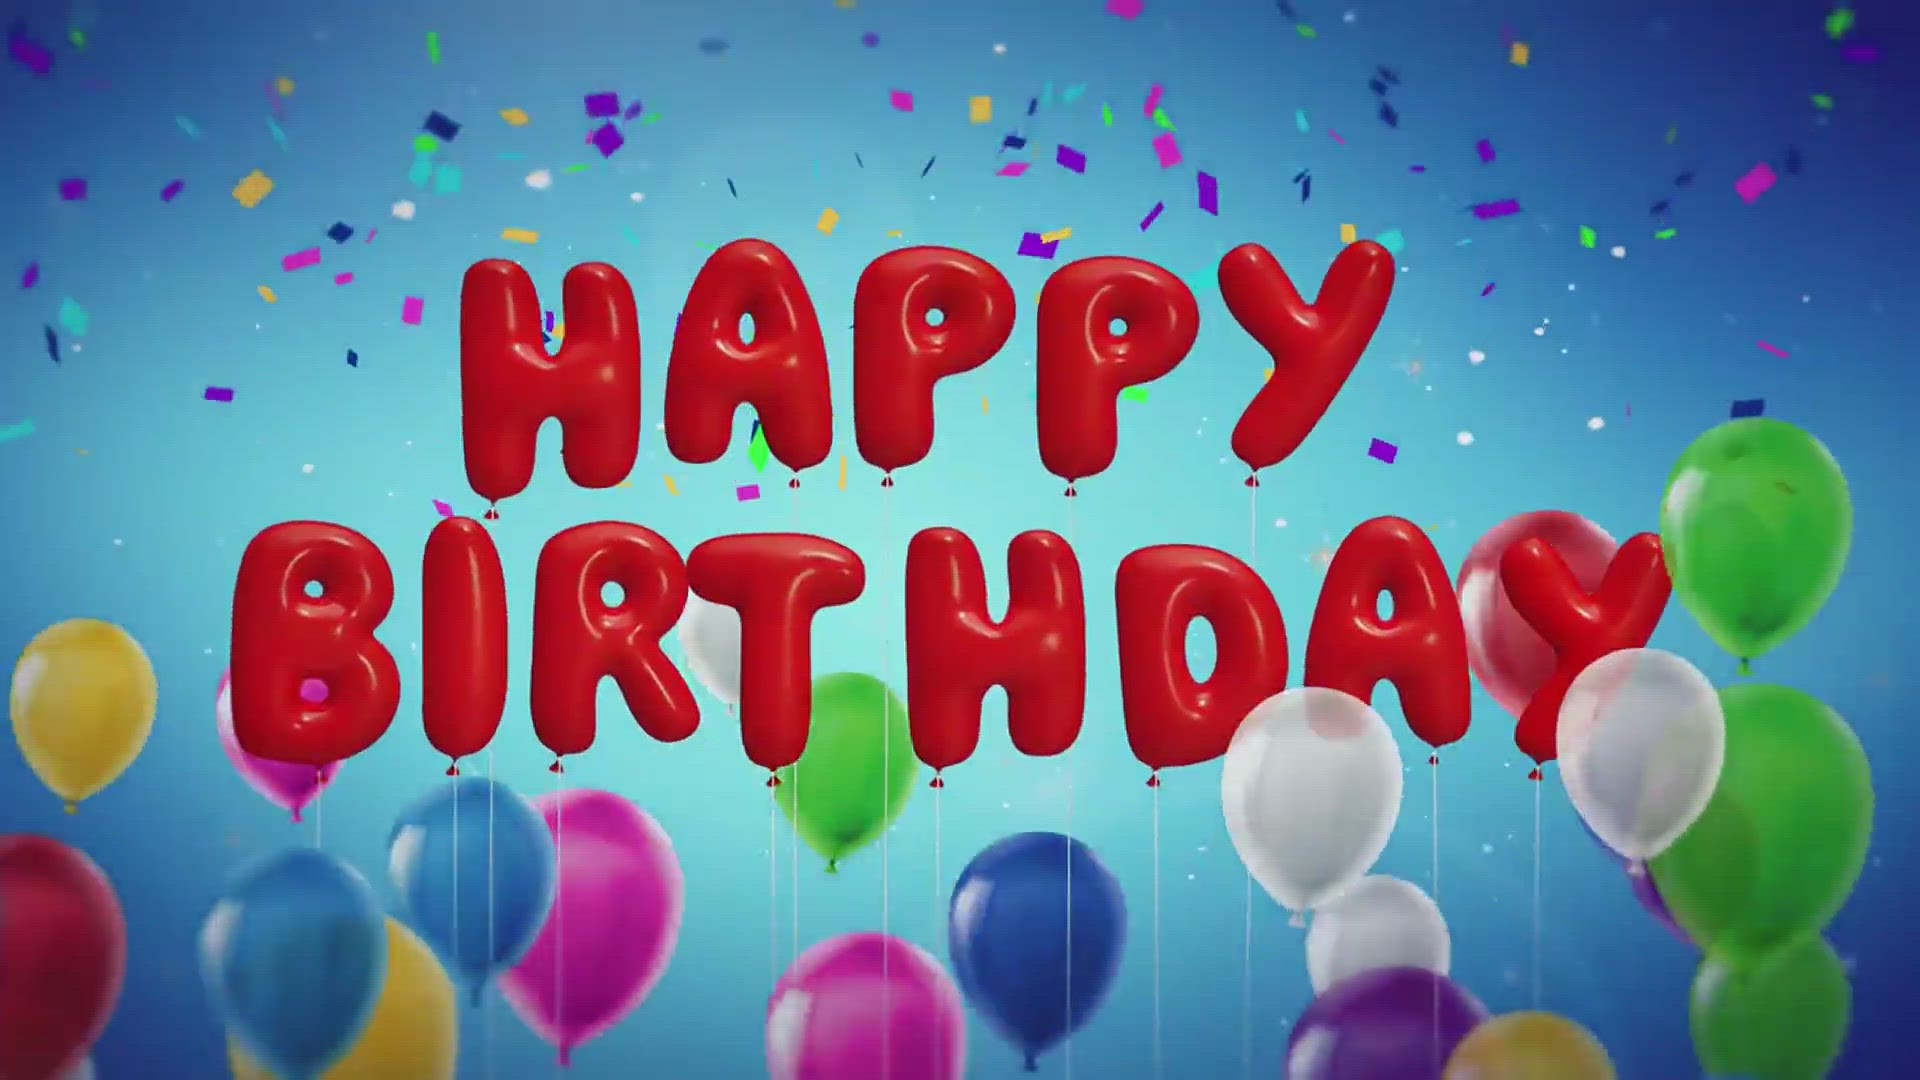 Bookmark this video to save it! Submit birthdays and enter the cookie contest by visiting 12NewsNow.com/Birthdays BEFORE midnight the night before the birthday.